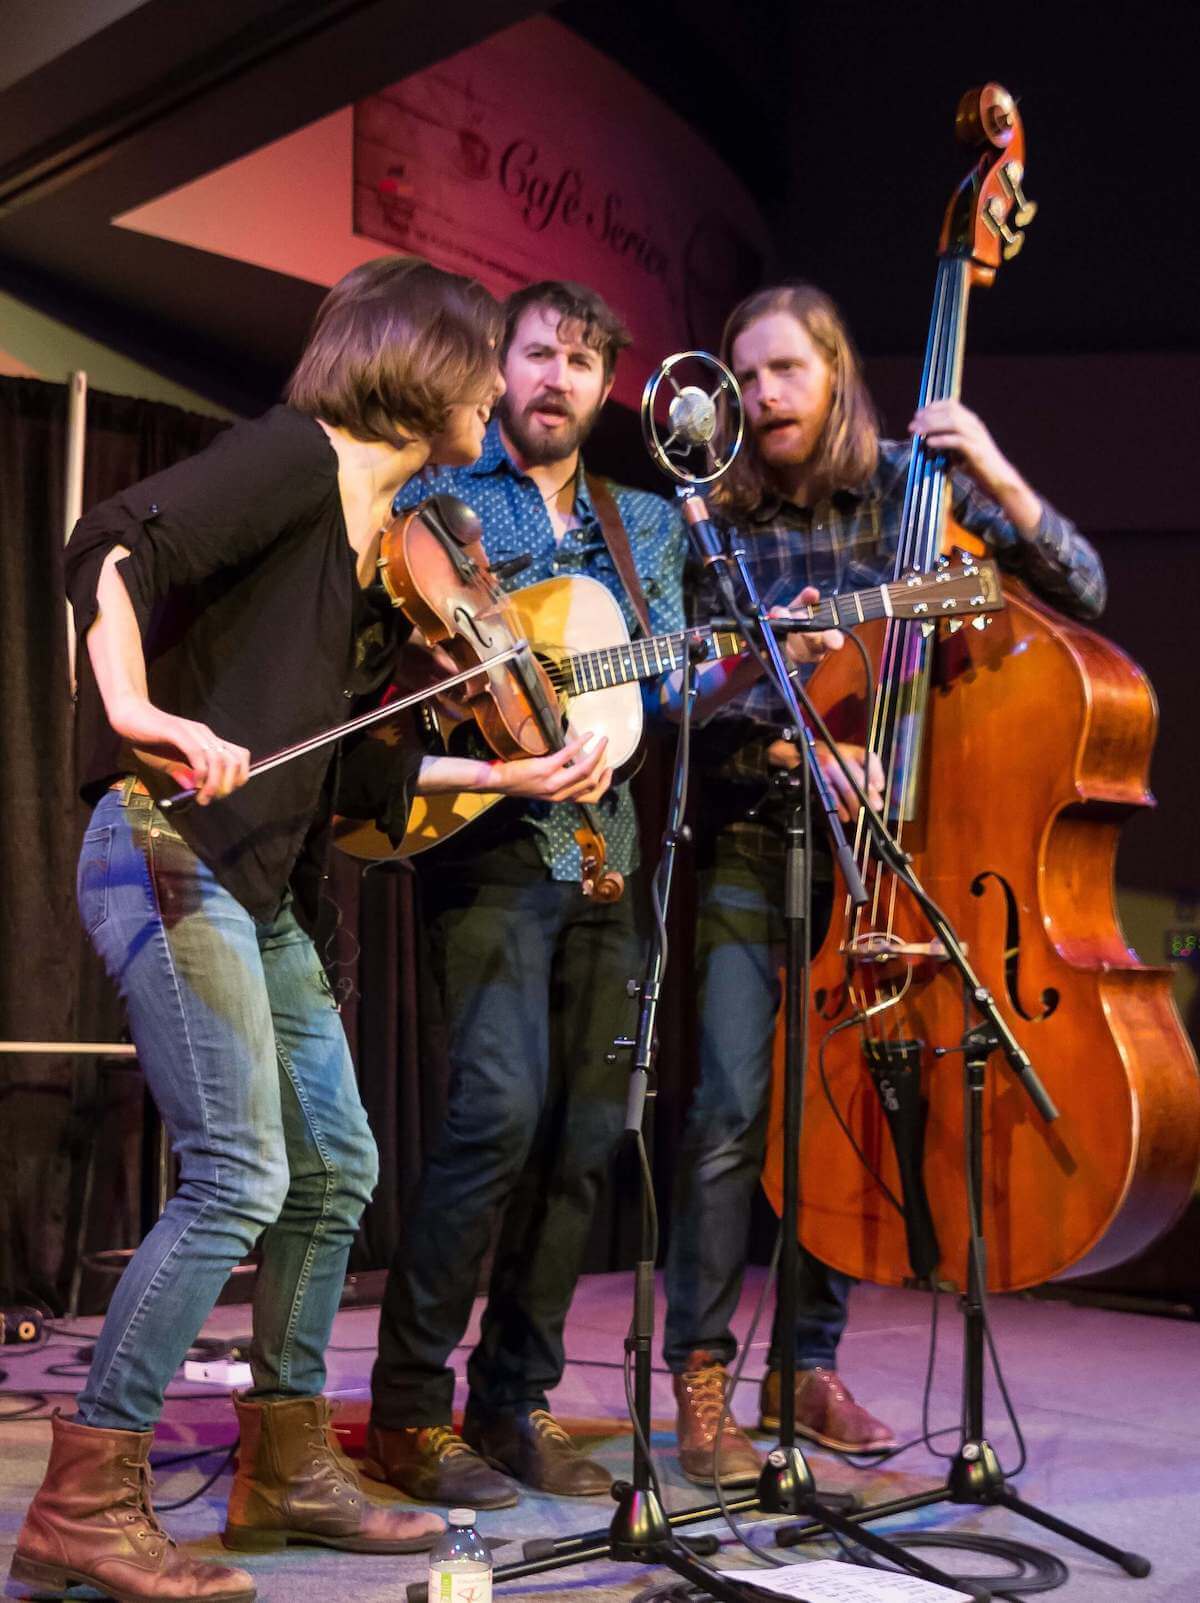  Three musicians playing a guitar, fiddle and bass harmonizing around one mic. 